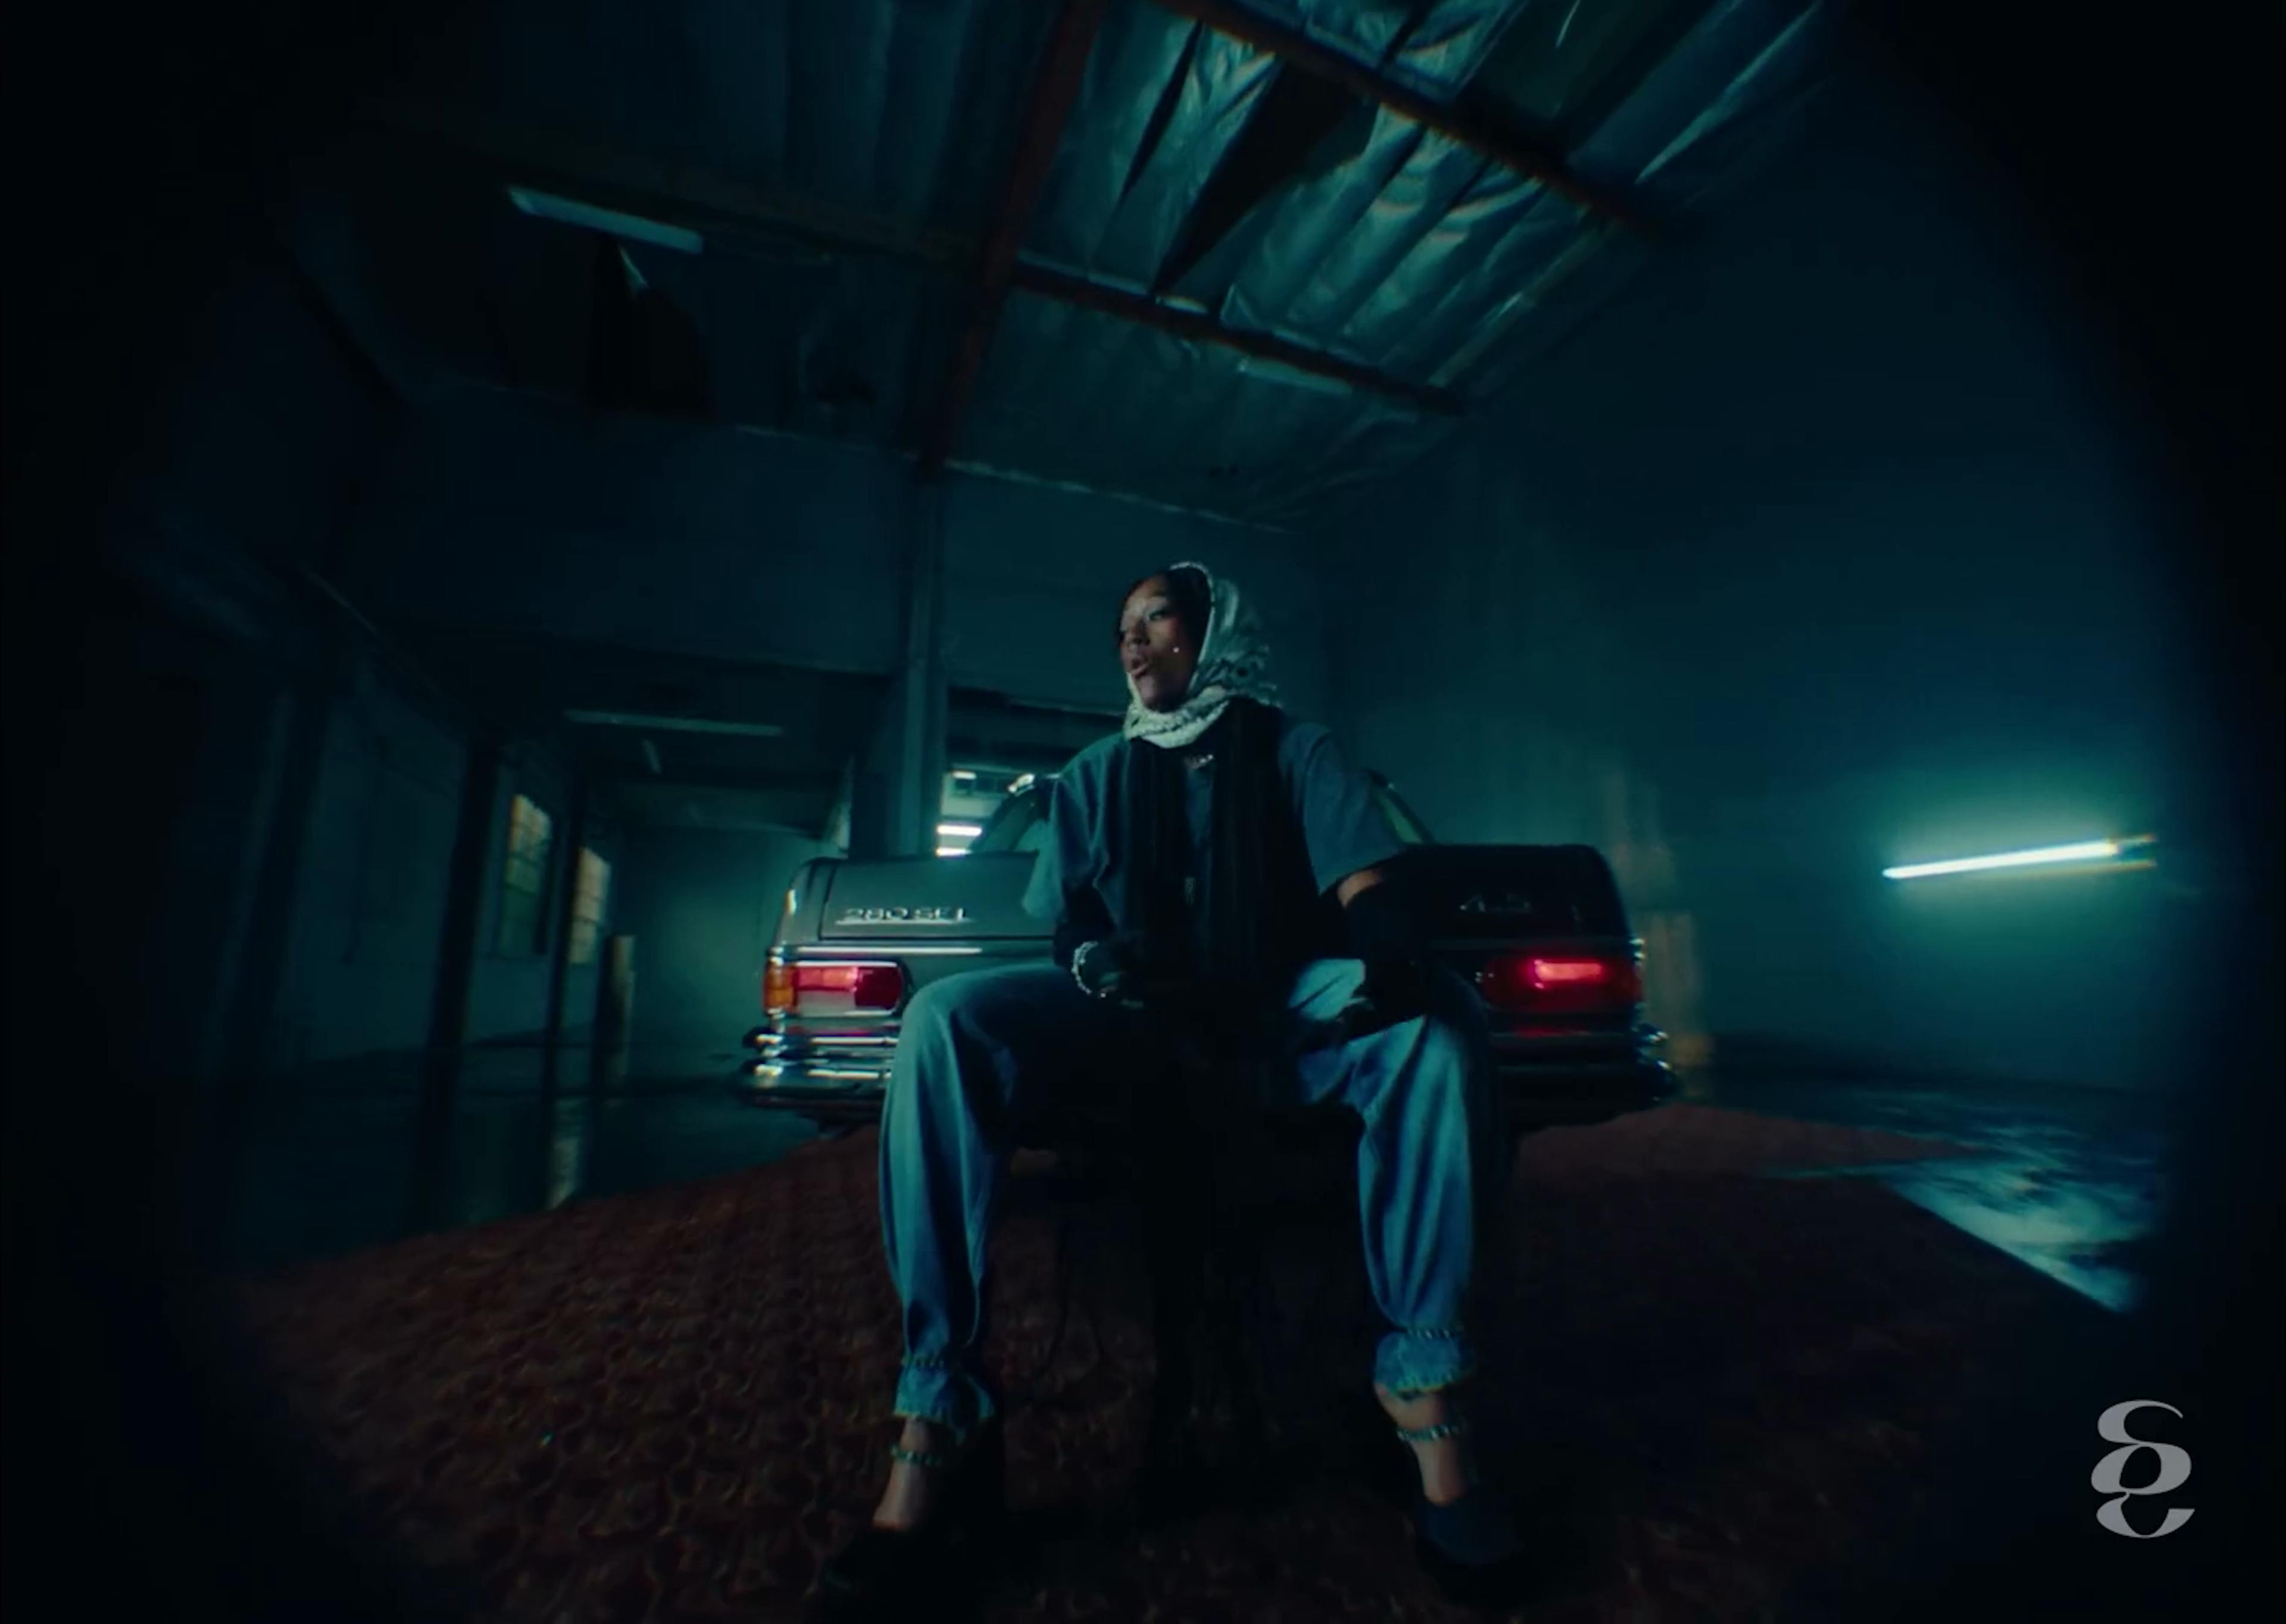 In a dimly lit garage setting from Aryèe The Gem's music video 'To It,' she sits confidently on a vintage car. She's wearing a grey hooded top, blue jeans, and black heels. The ambient lighting casts a blue tone across the scene, with streaks of light piercing the background, creating a dramatic and stylized visual.